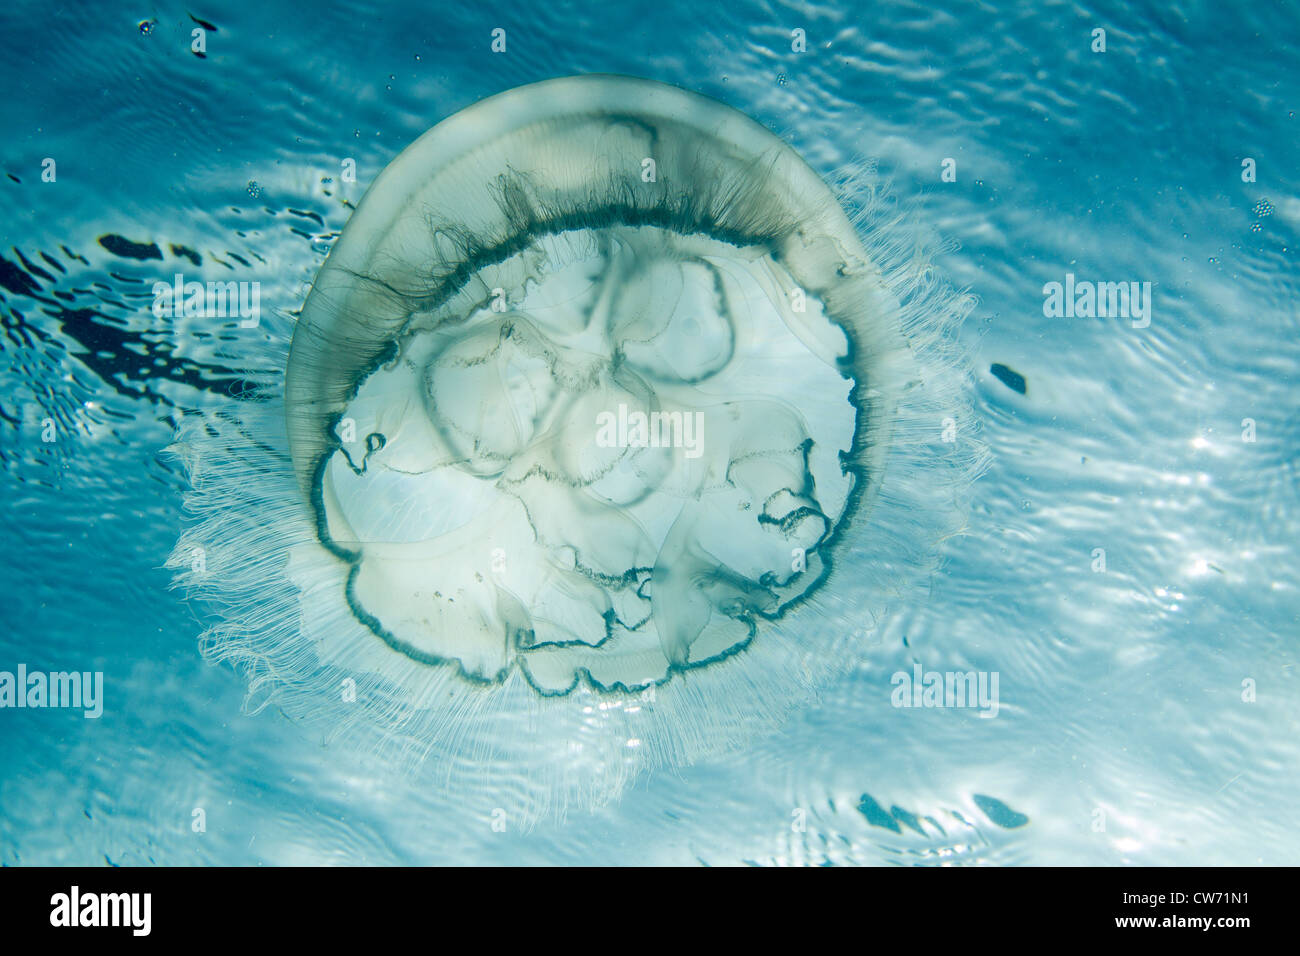 Moon jellyfish driven by water movement Stock Photo